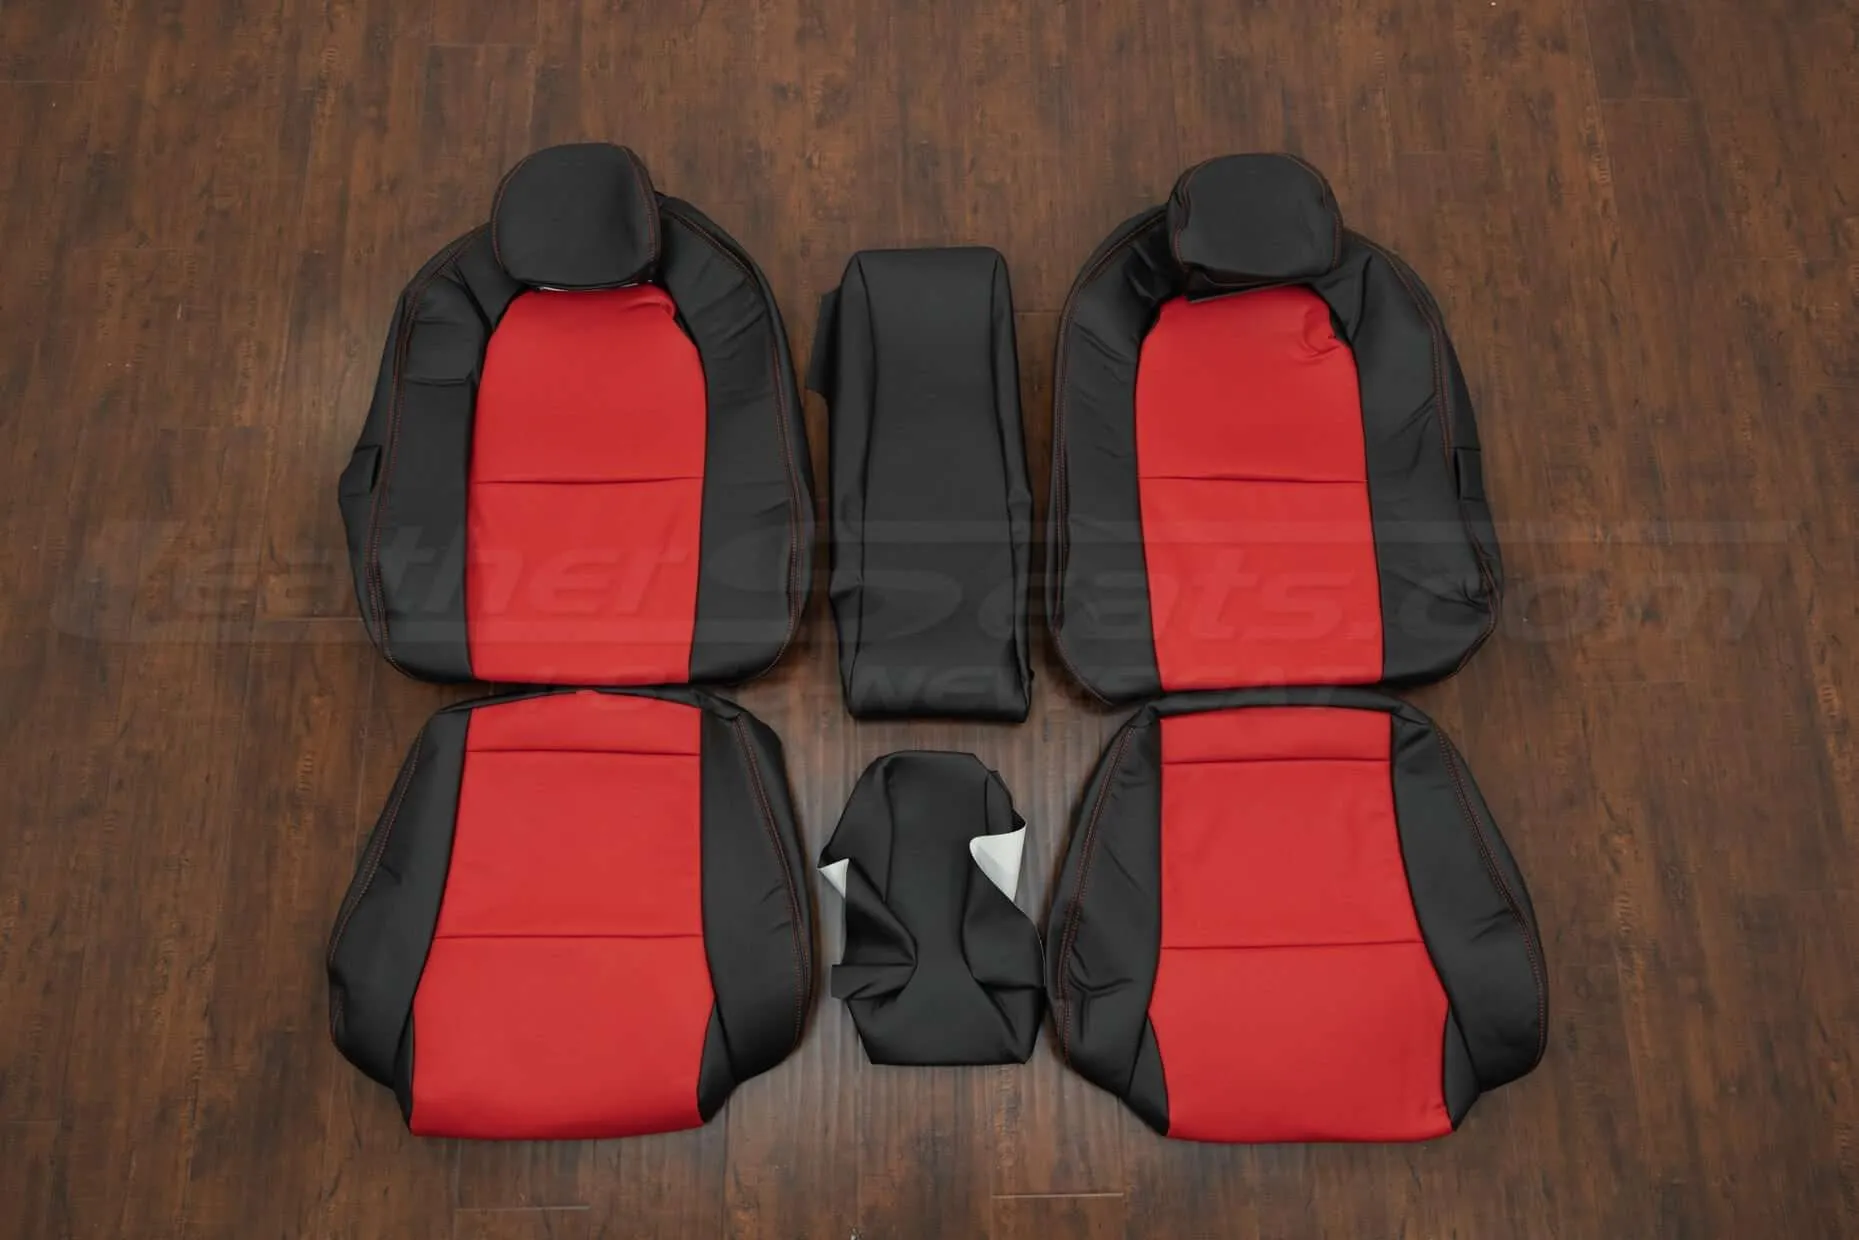 04-06 Pontiac GTO Leather Kit - Black & Bright Red - Rear seat upholstery with bolsters